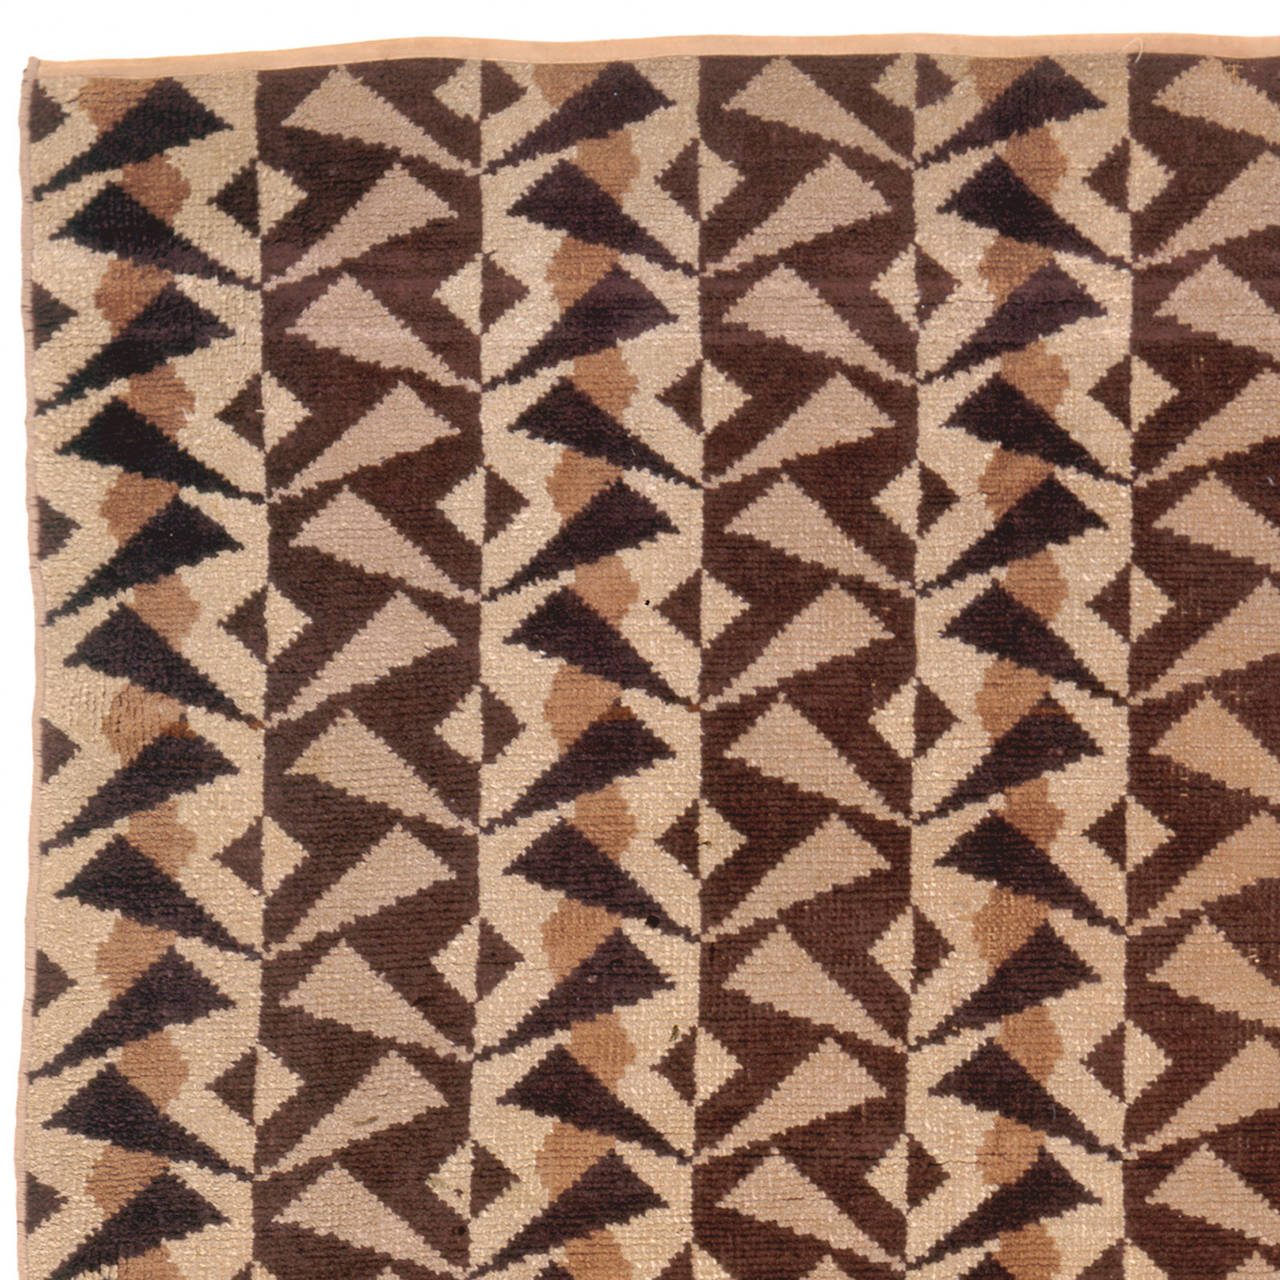 20th Century French Savonnerie Carpet
France, circa 1928
'Pyramides' design
Art Deco
Designed by Paul Hasaerts for De Saedeleer
Wool carpet with an overall geometric design in shades of chocolate, fawn, beige and cream